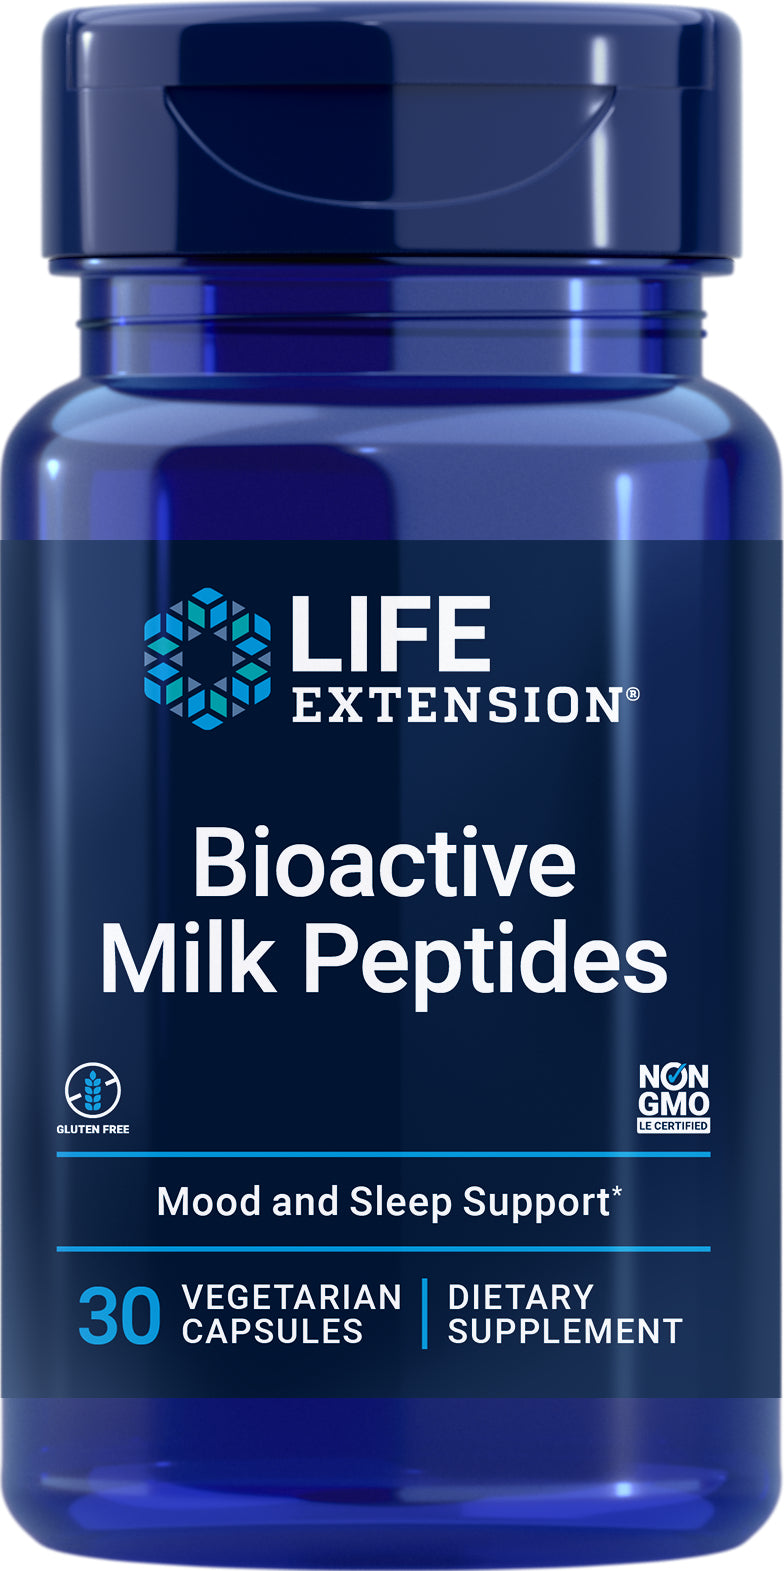 Bioactive Milk Peptides 30 veg caps by Life Extension